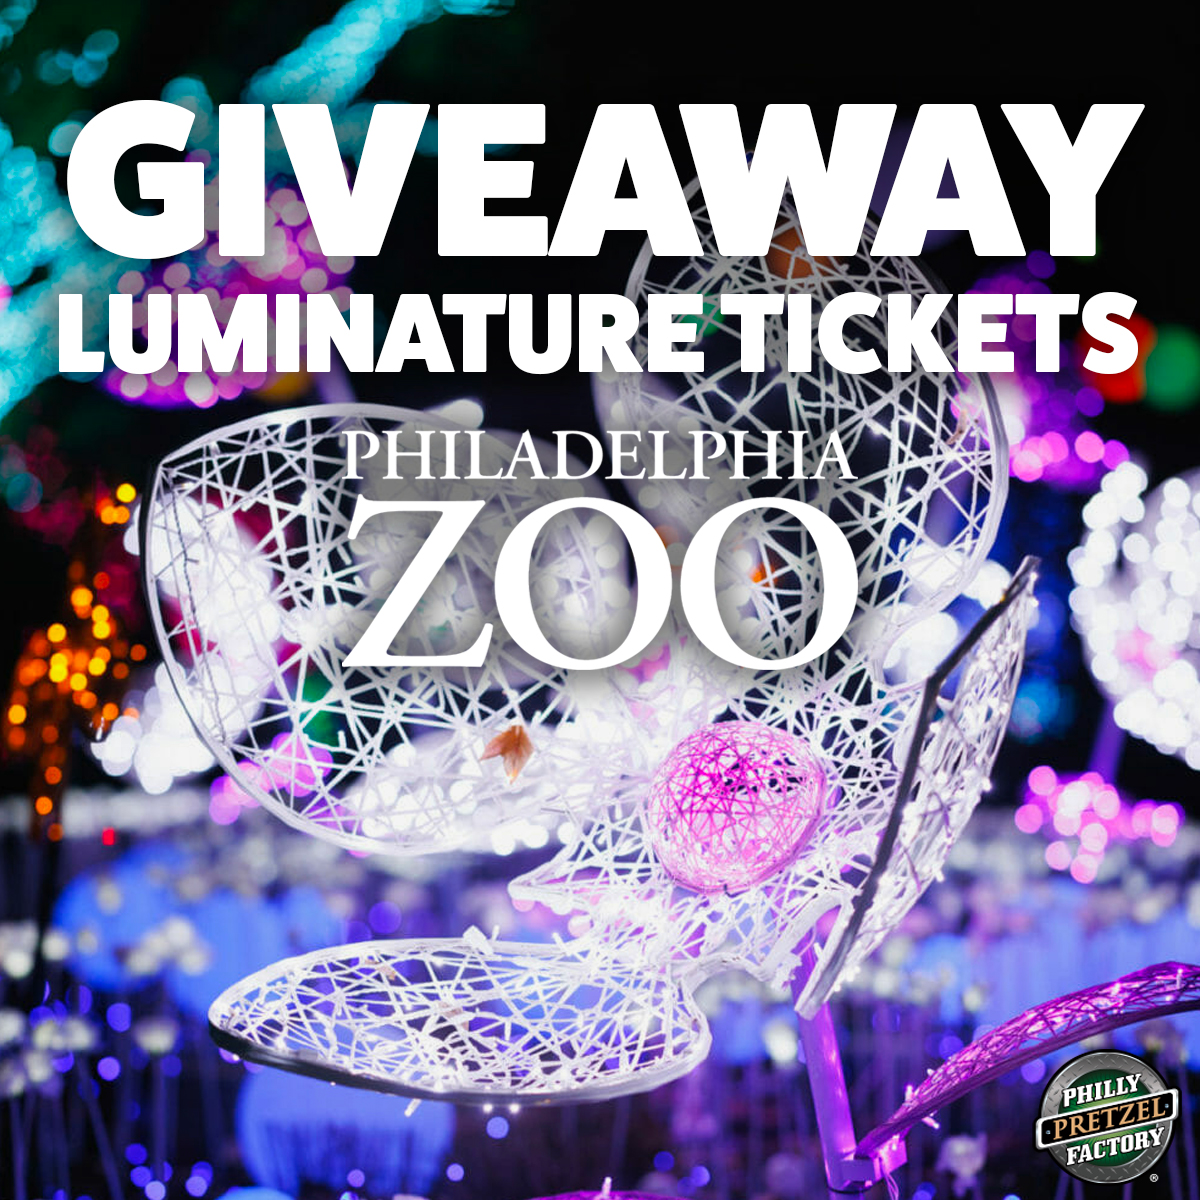 Giveaway Luminature Tickets